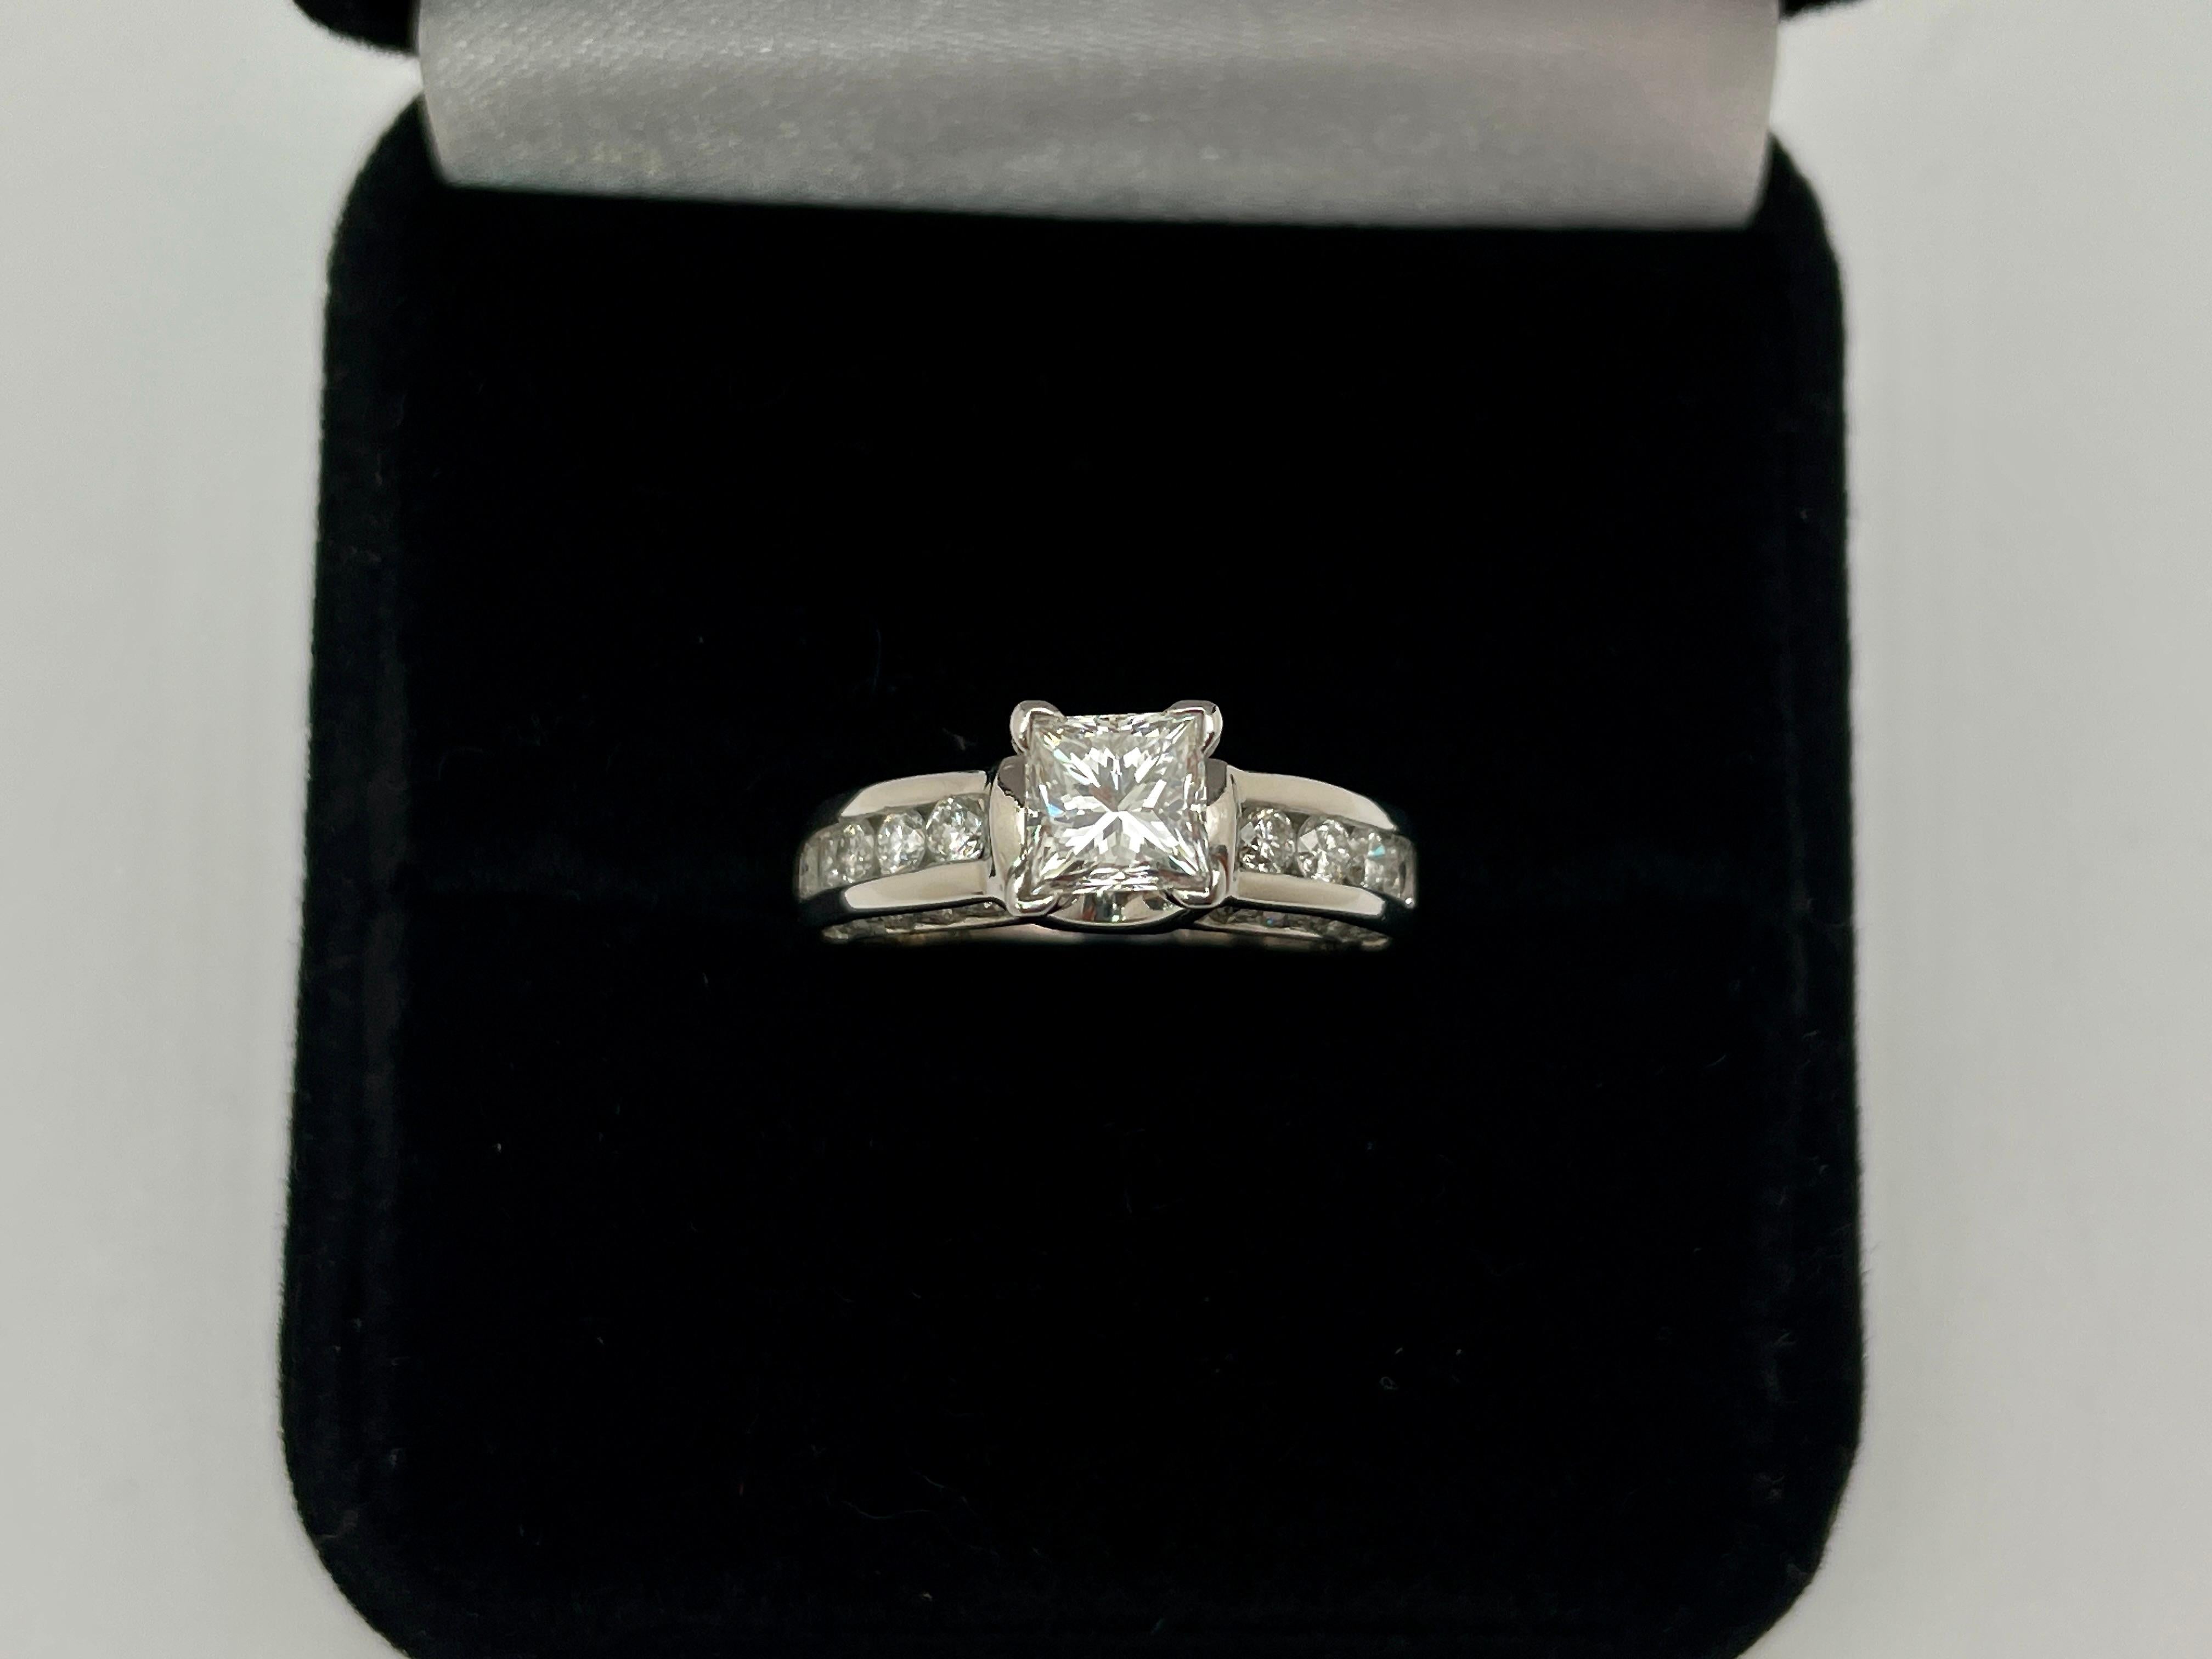 An original GIA certified 2.15 CT total diamond platinum engagement ring. Centered with a square modified brilliant cut diamond weighing 0.90 CT, E color, VVS2 clarity. Set on a uniquely designed double-sided diamond platinum setting, with 30 round